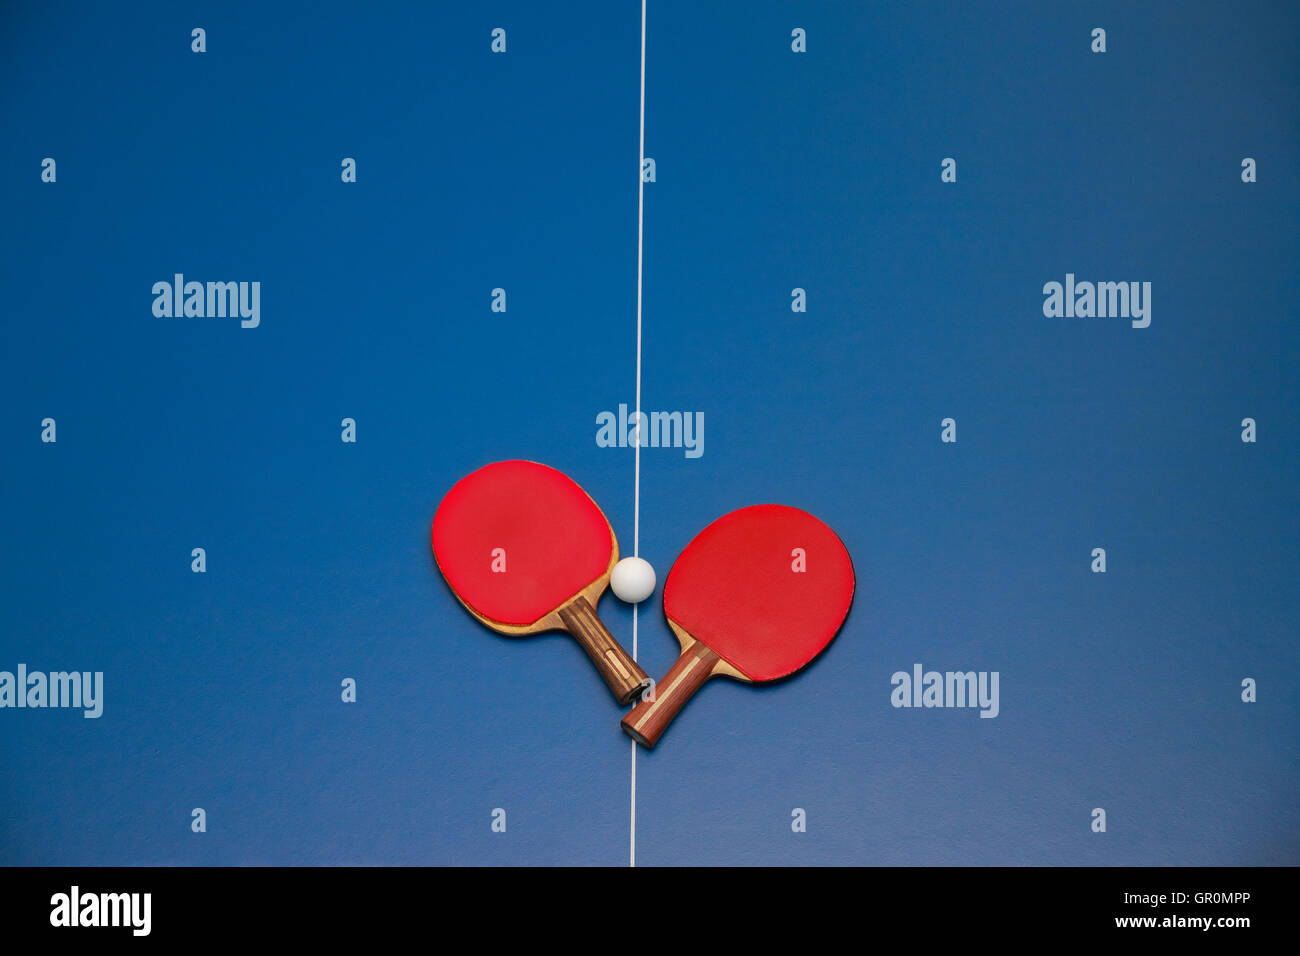 Rackets for table tennis of red color and a ball on a tennis table, view from above Stock Photo